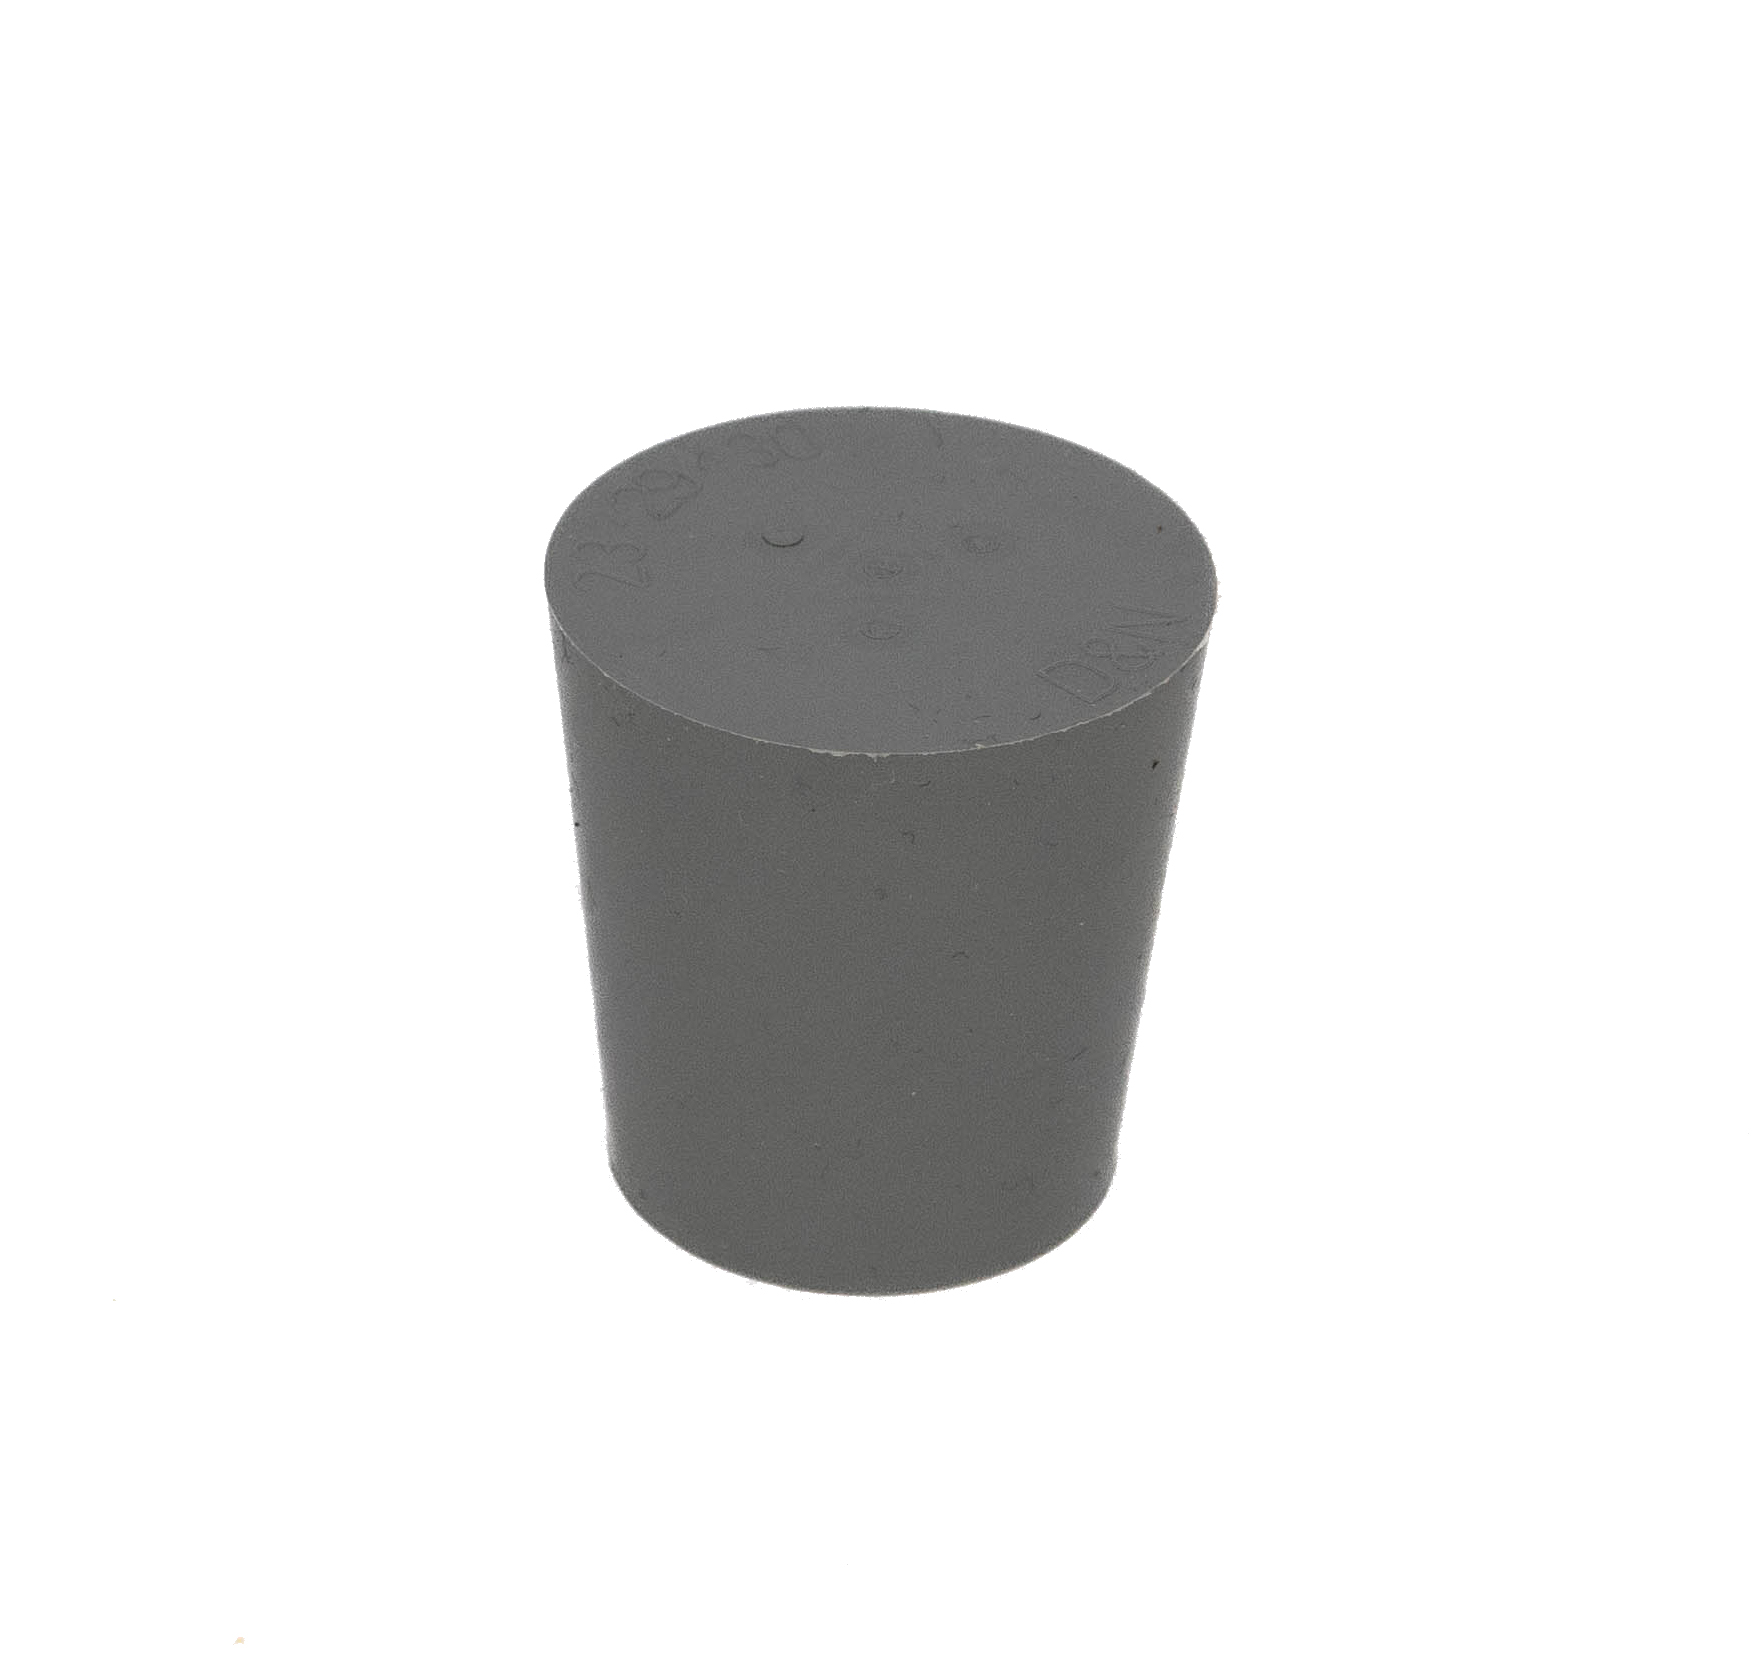 Rubber stopper grey 23 x 29 mm without hole